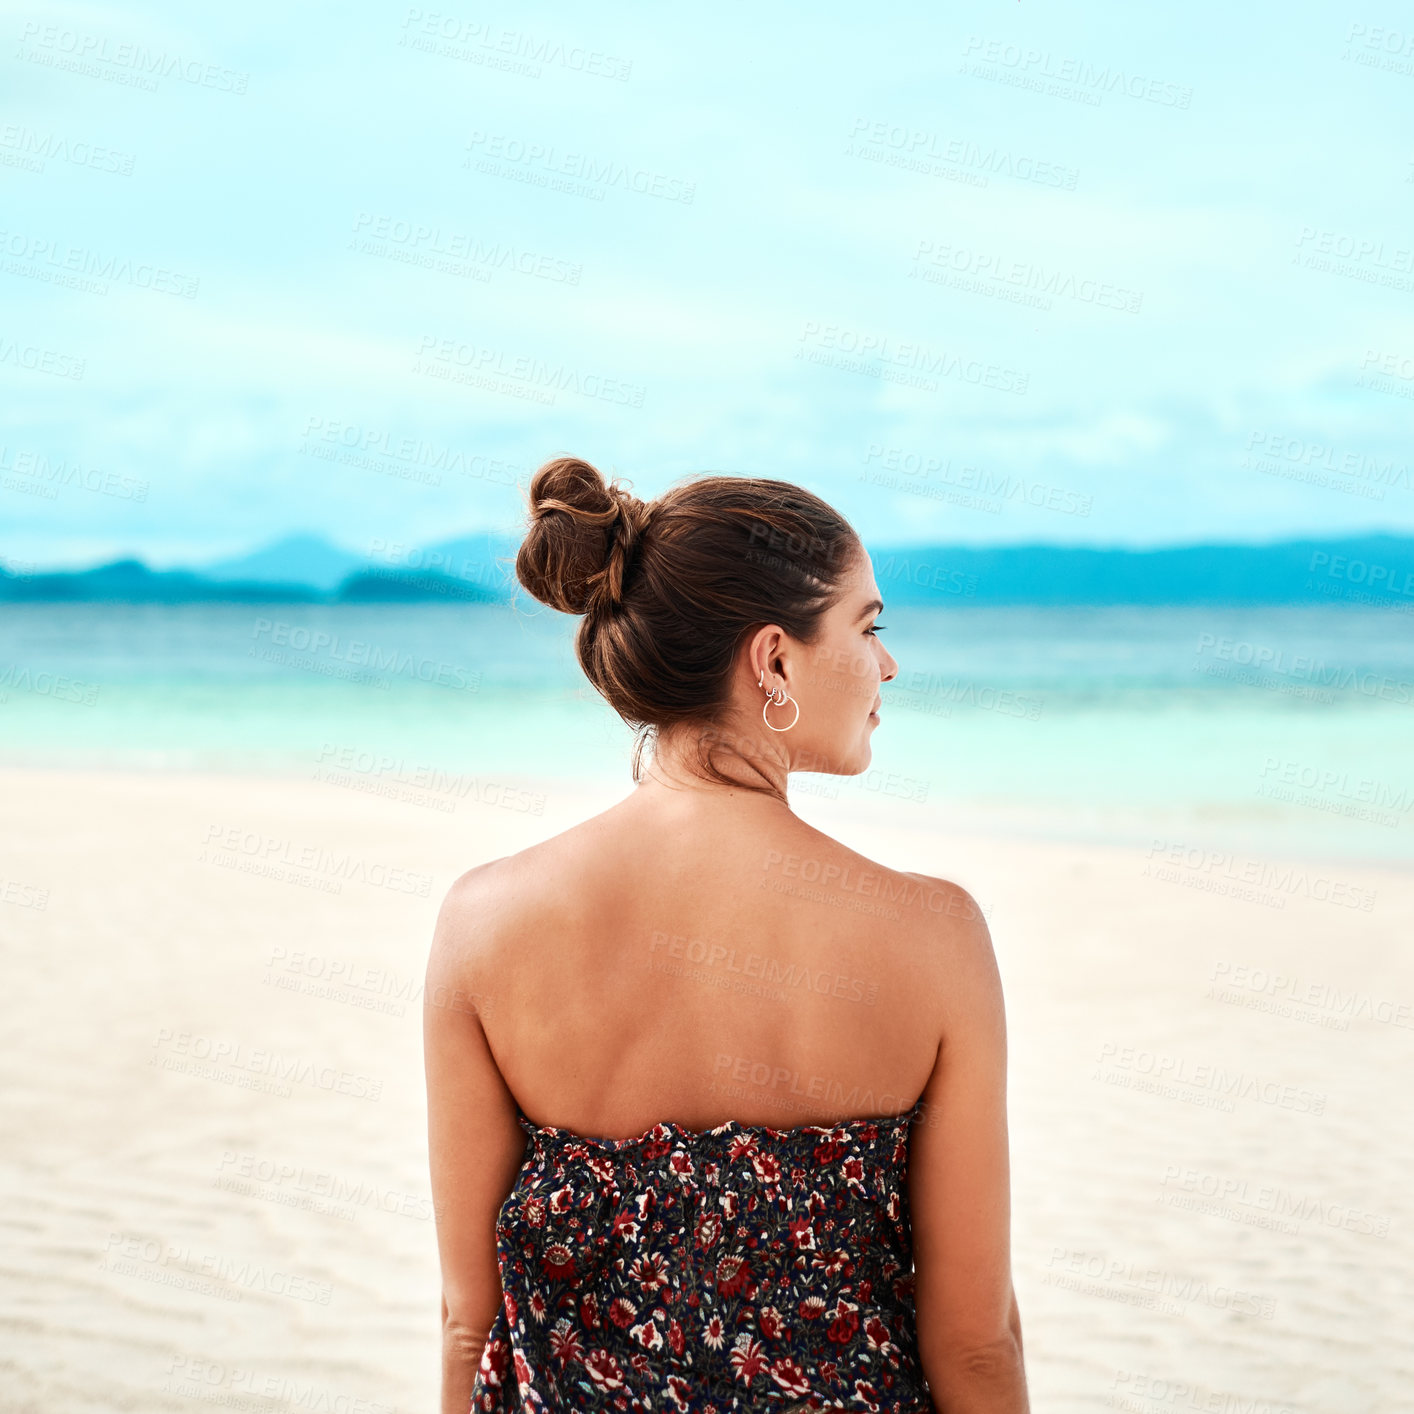 Buy stock photo Rearview shot of a young woman spending the day at the beach